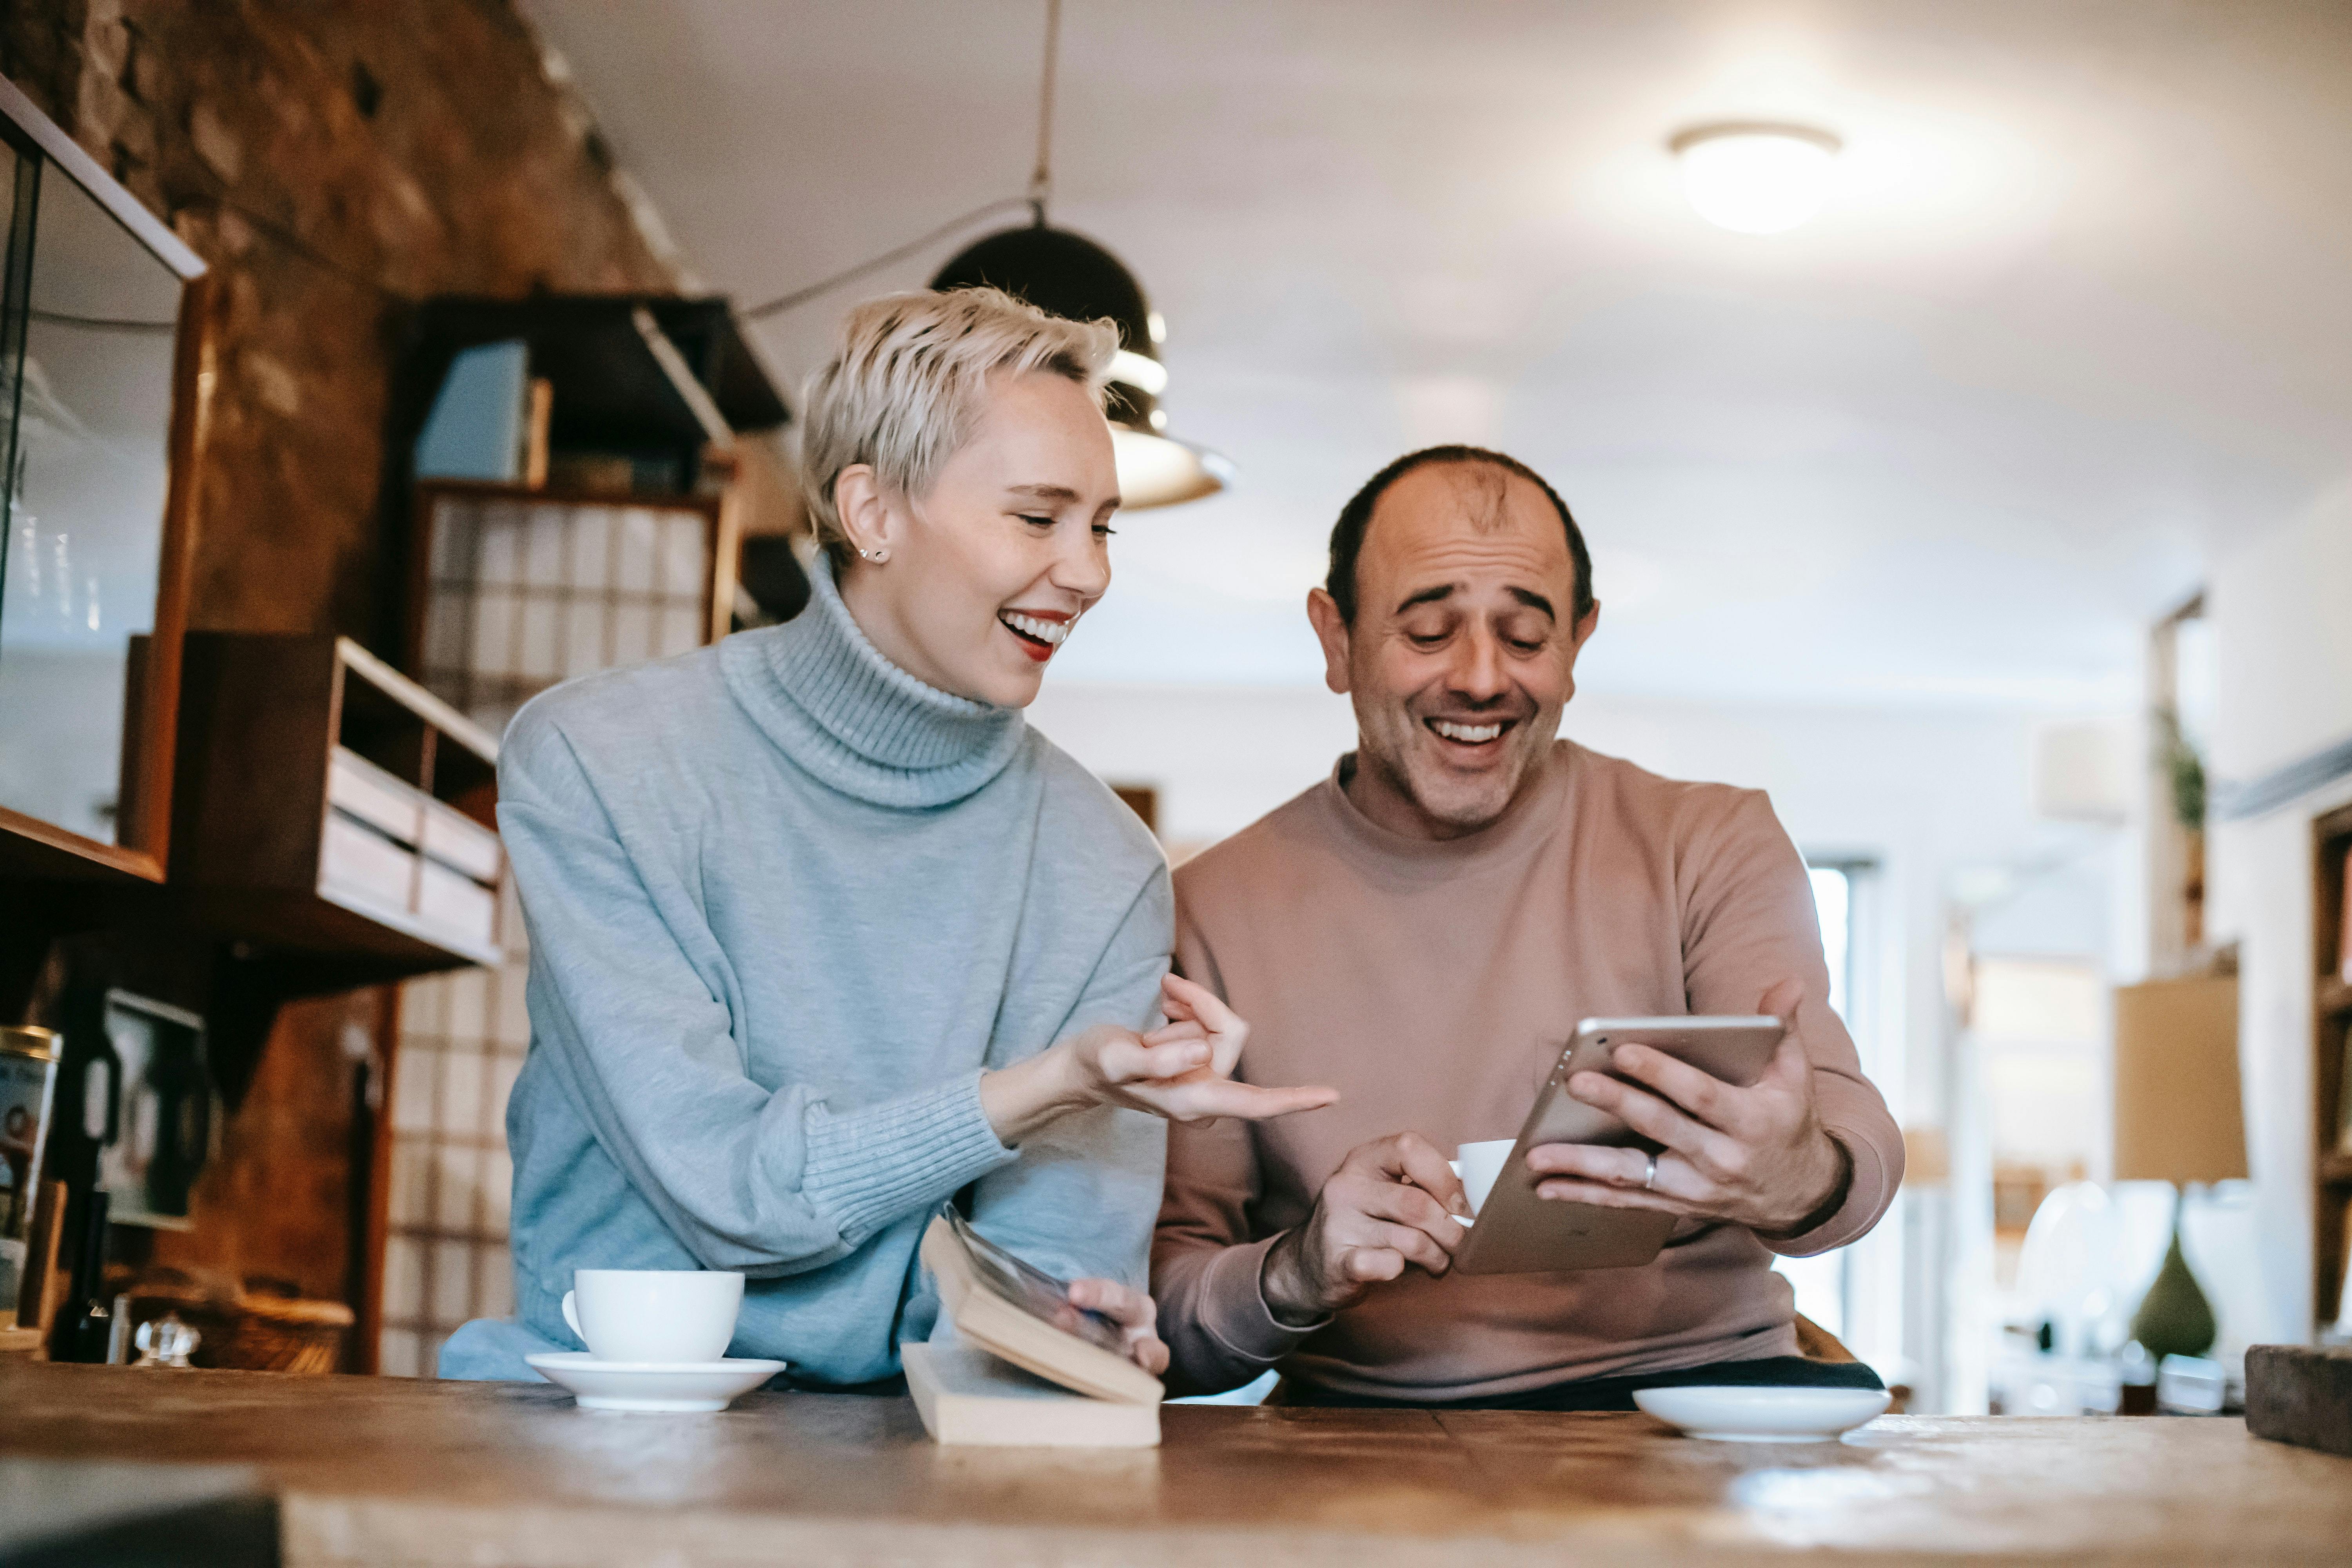 Blond woman and dark hair man smiling down at the man's tablet